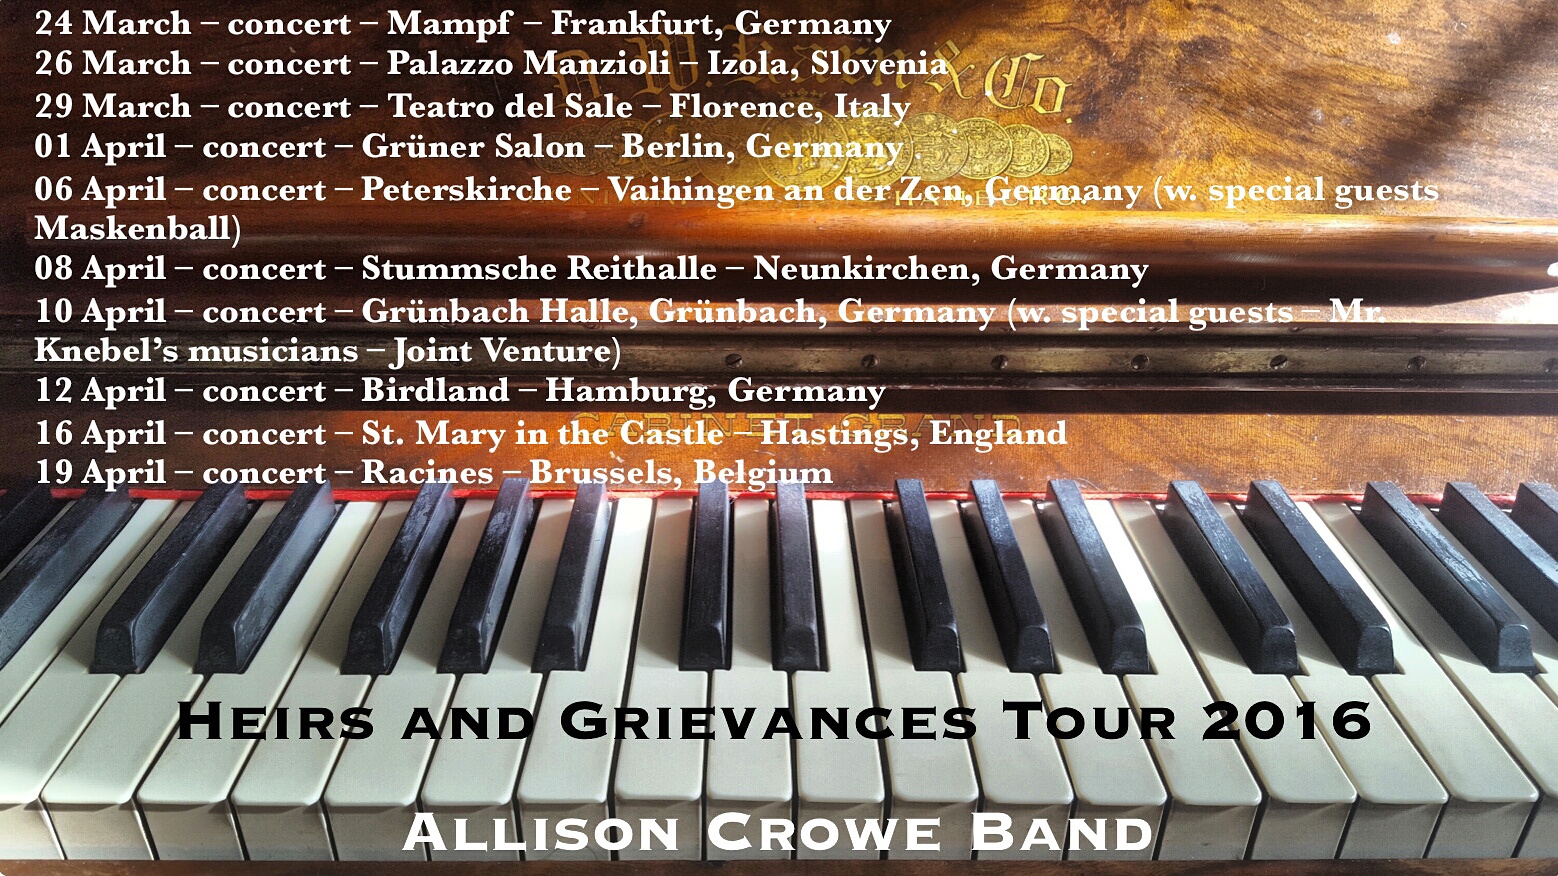 Heirs + Grievances Tournee 2016 - Allison Crowe and Band